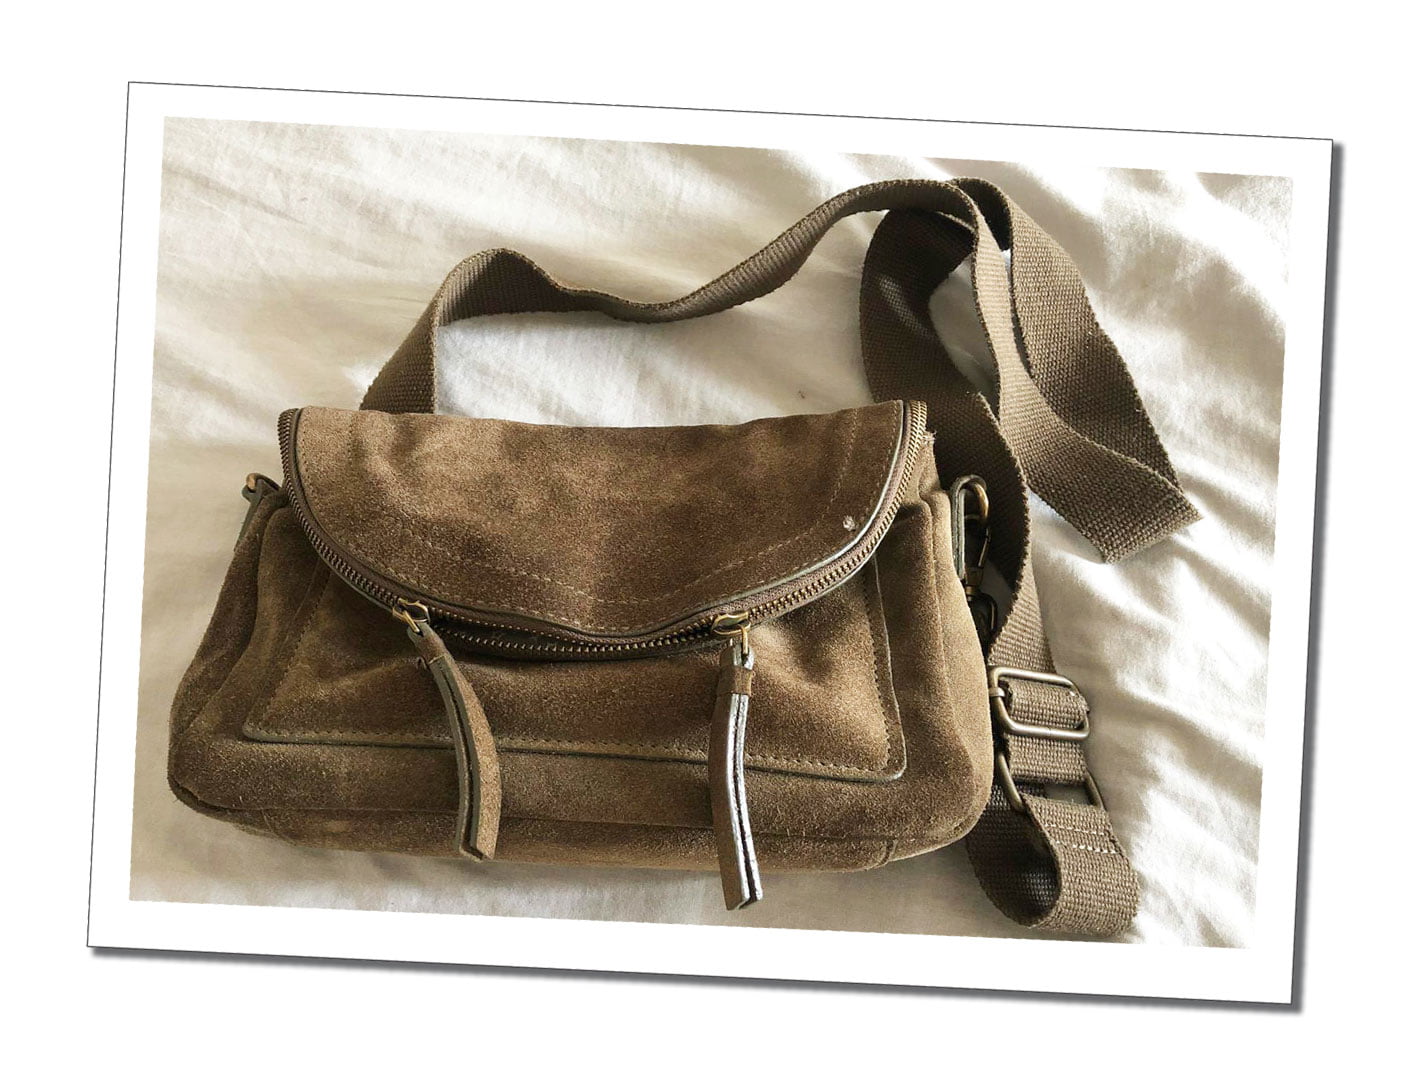 A beige suede shoulder bag laying on a white bed spread